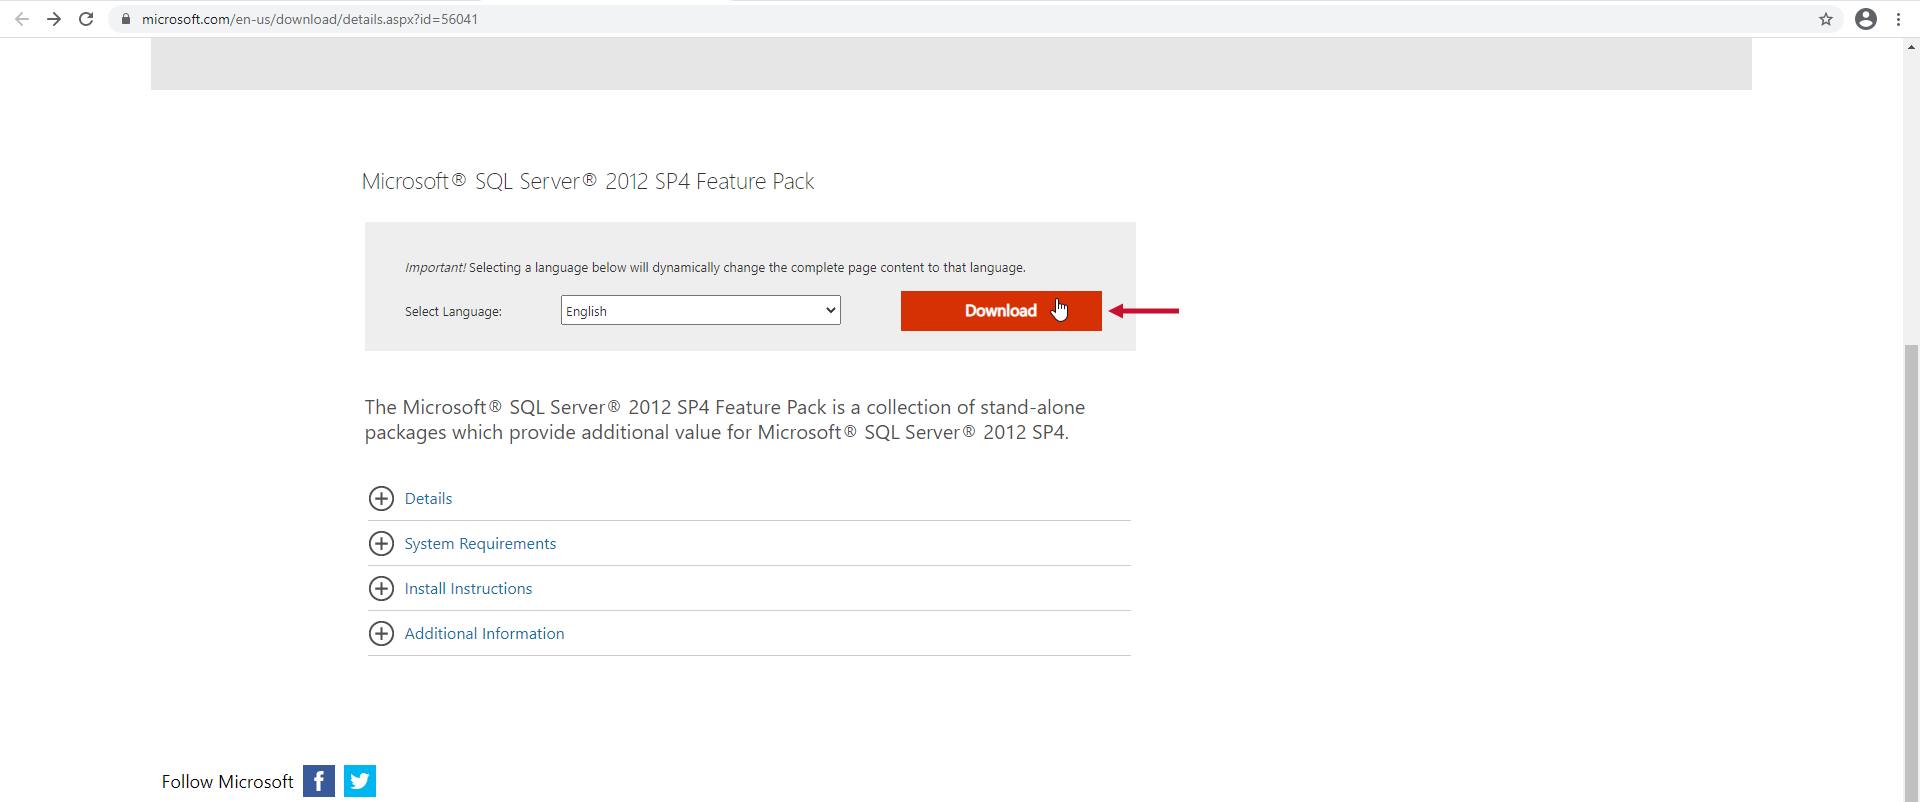 SQL Server 2012 SP4 Feature Pack select download to complete the download.